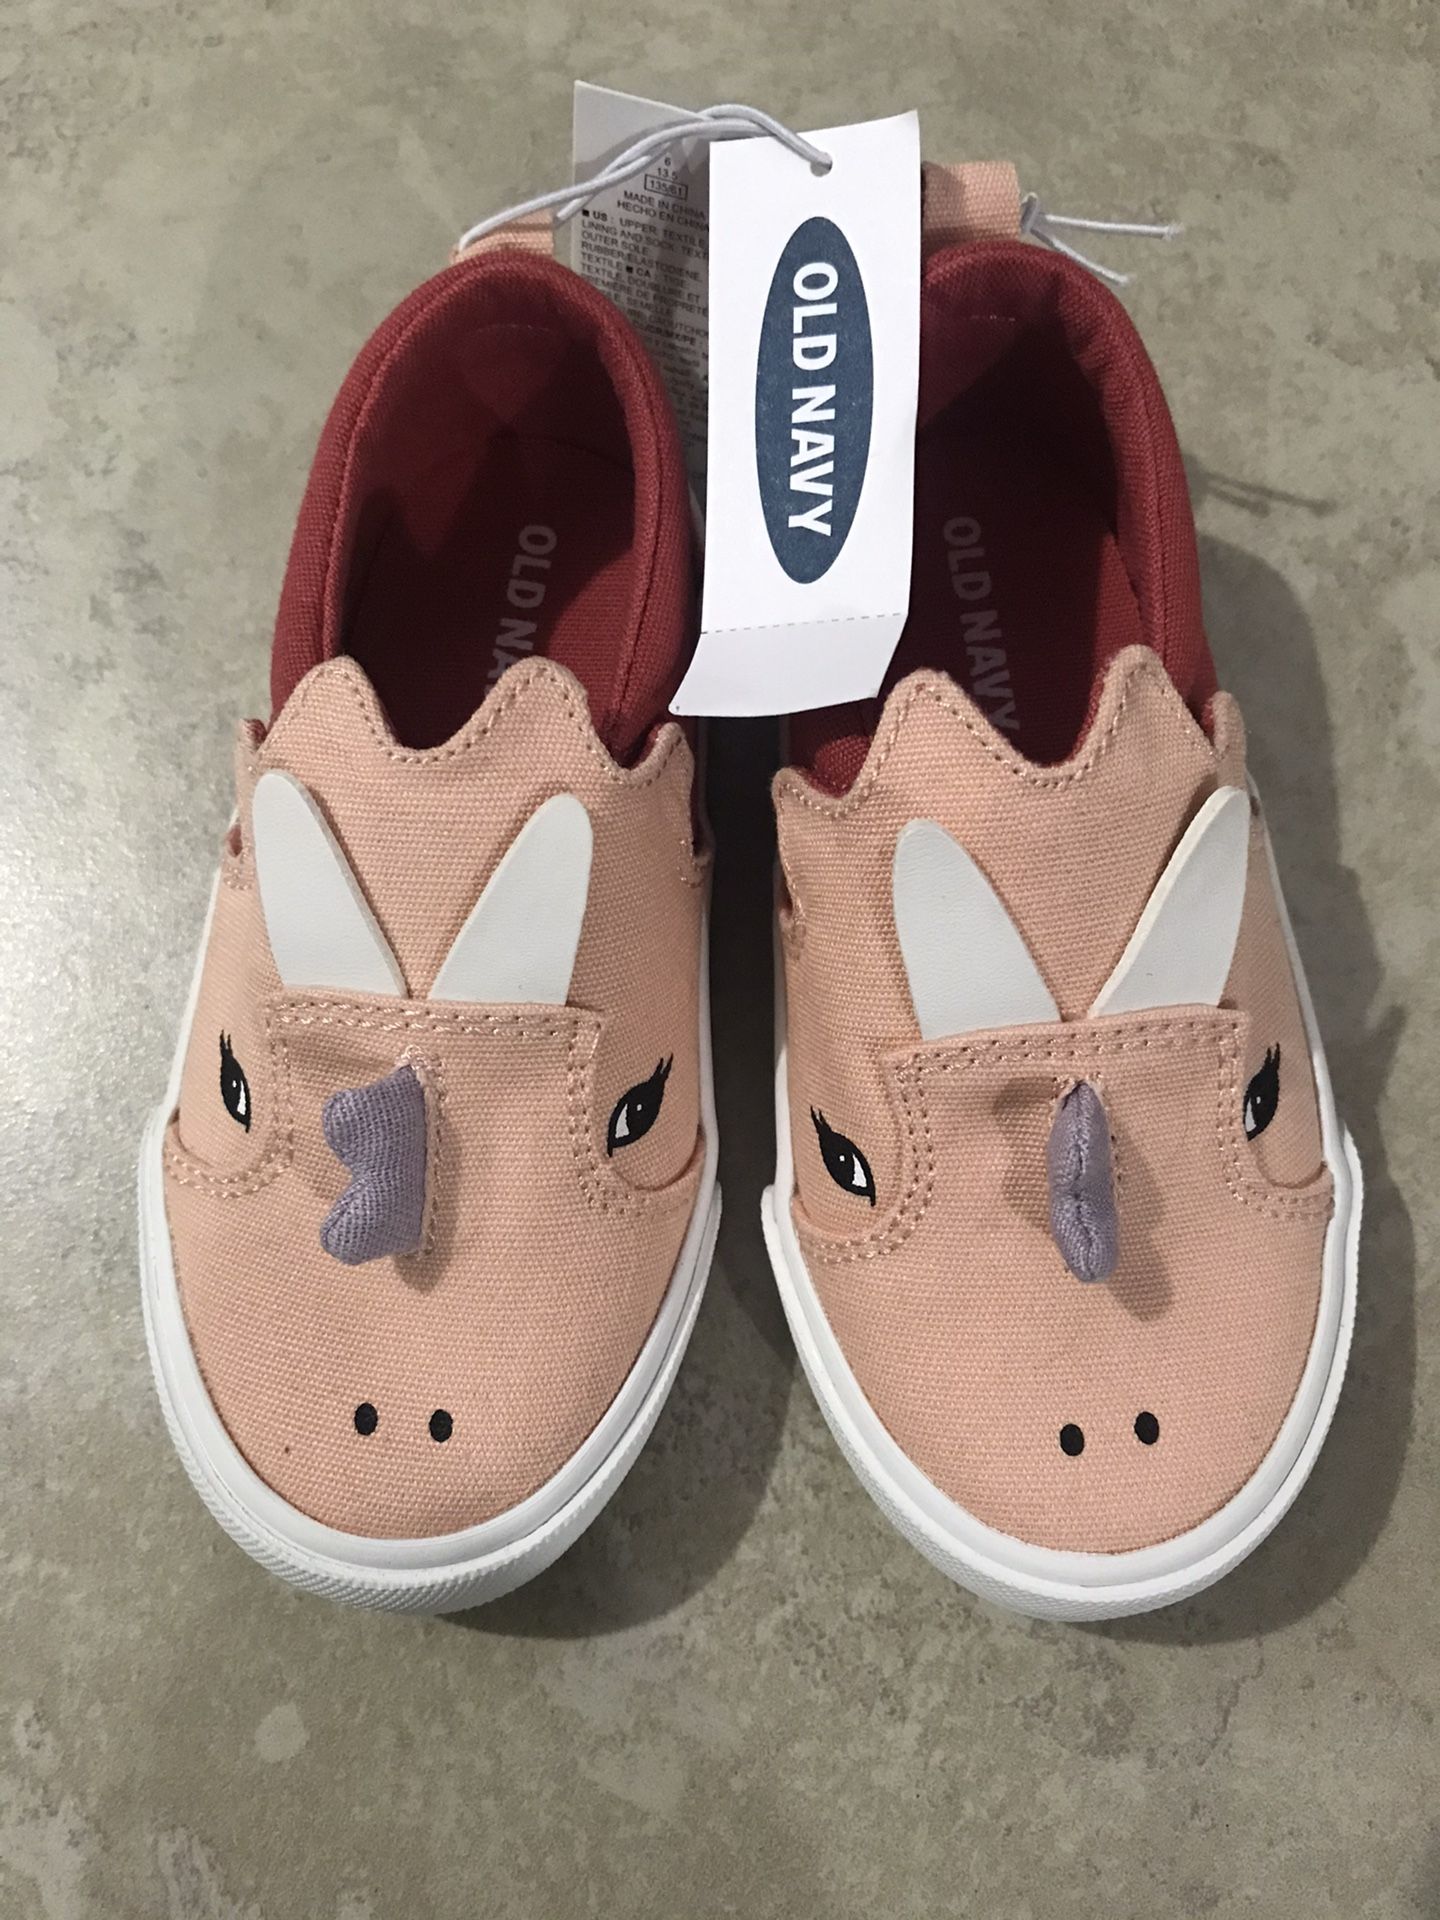 Old Navy Toddler Boy’s / Girl’s Canvas Dinosaur Slip-On Shoes, Size 6